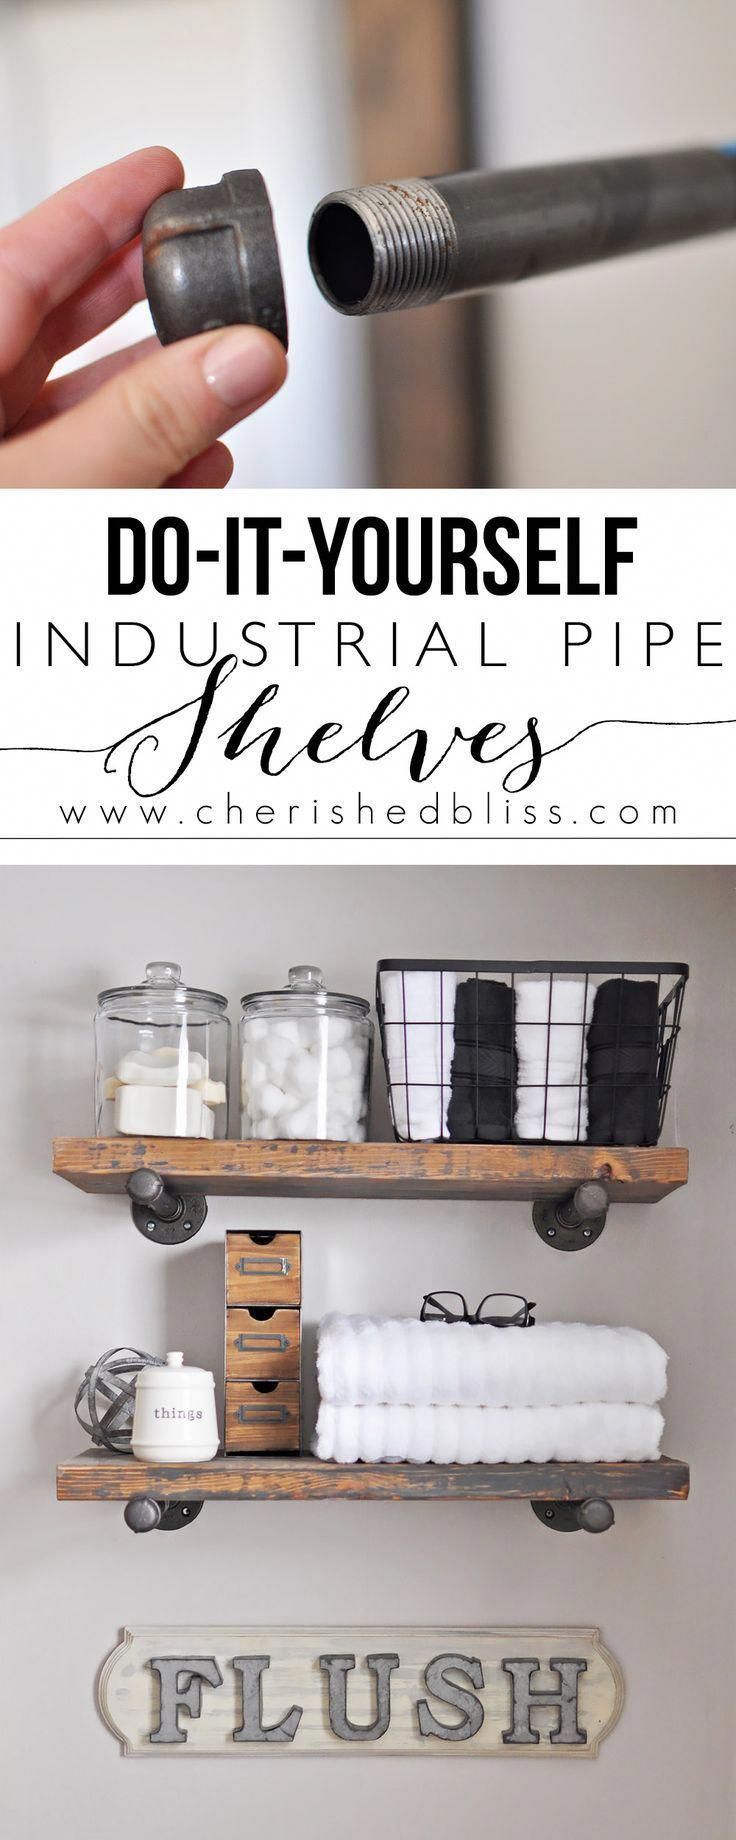 How to Build DIY Industrial Pipe Shelves - Cherished Bliss - How to Build DIY Industrial Pipe Shelves - Cherished Bliss -   19 diy Shelves floating ideas